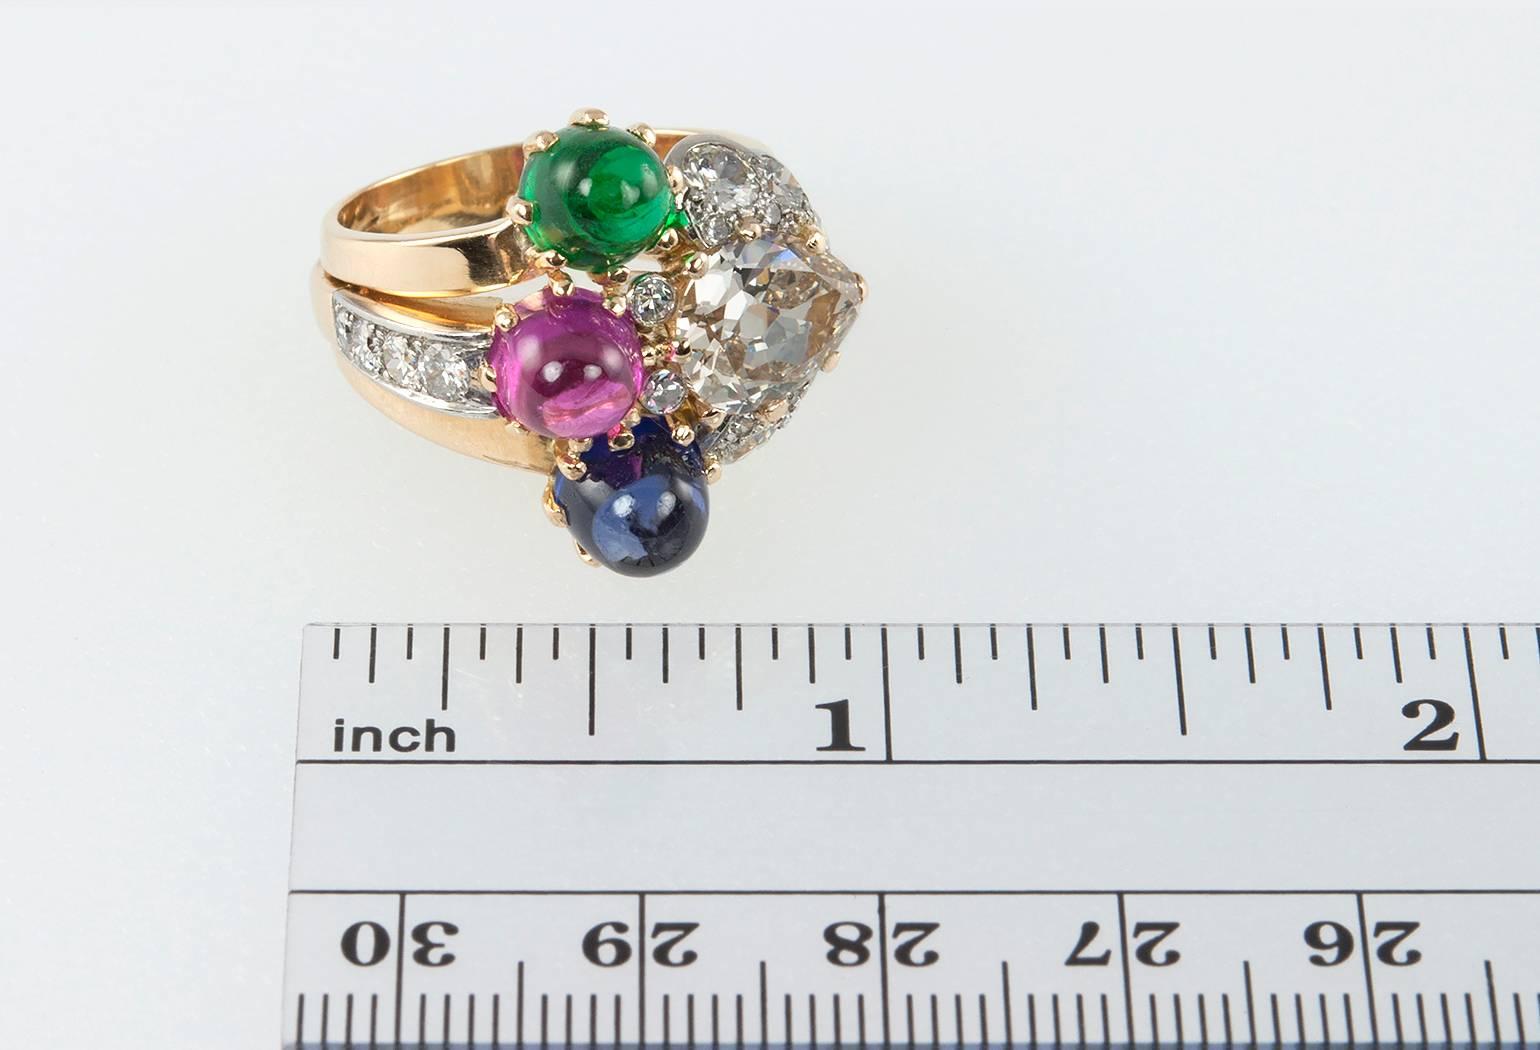 A 1950s retro 18 karat yellow gold ring featuring an Old European Cut pear shaped diamond, approximately 2.02 carats, L-M in color and VS in clarity.  The pear shaped diamond is surrounded by 16 transitional cut round diamonds, approximately 1 carat